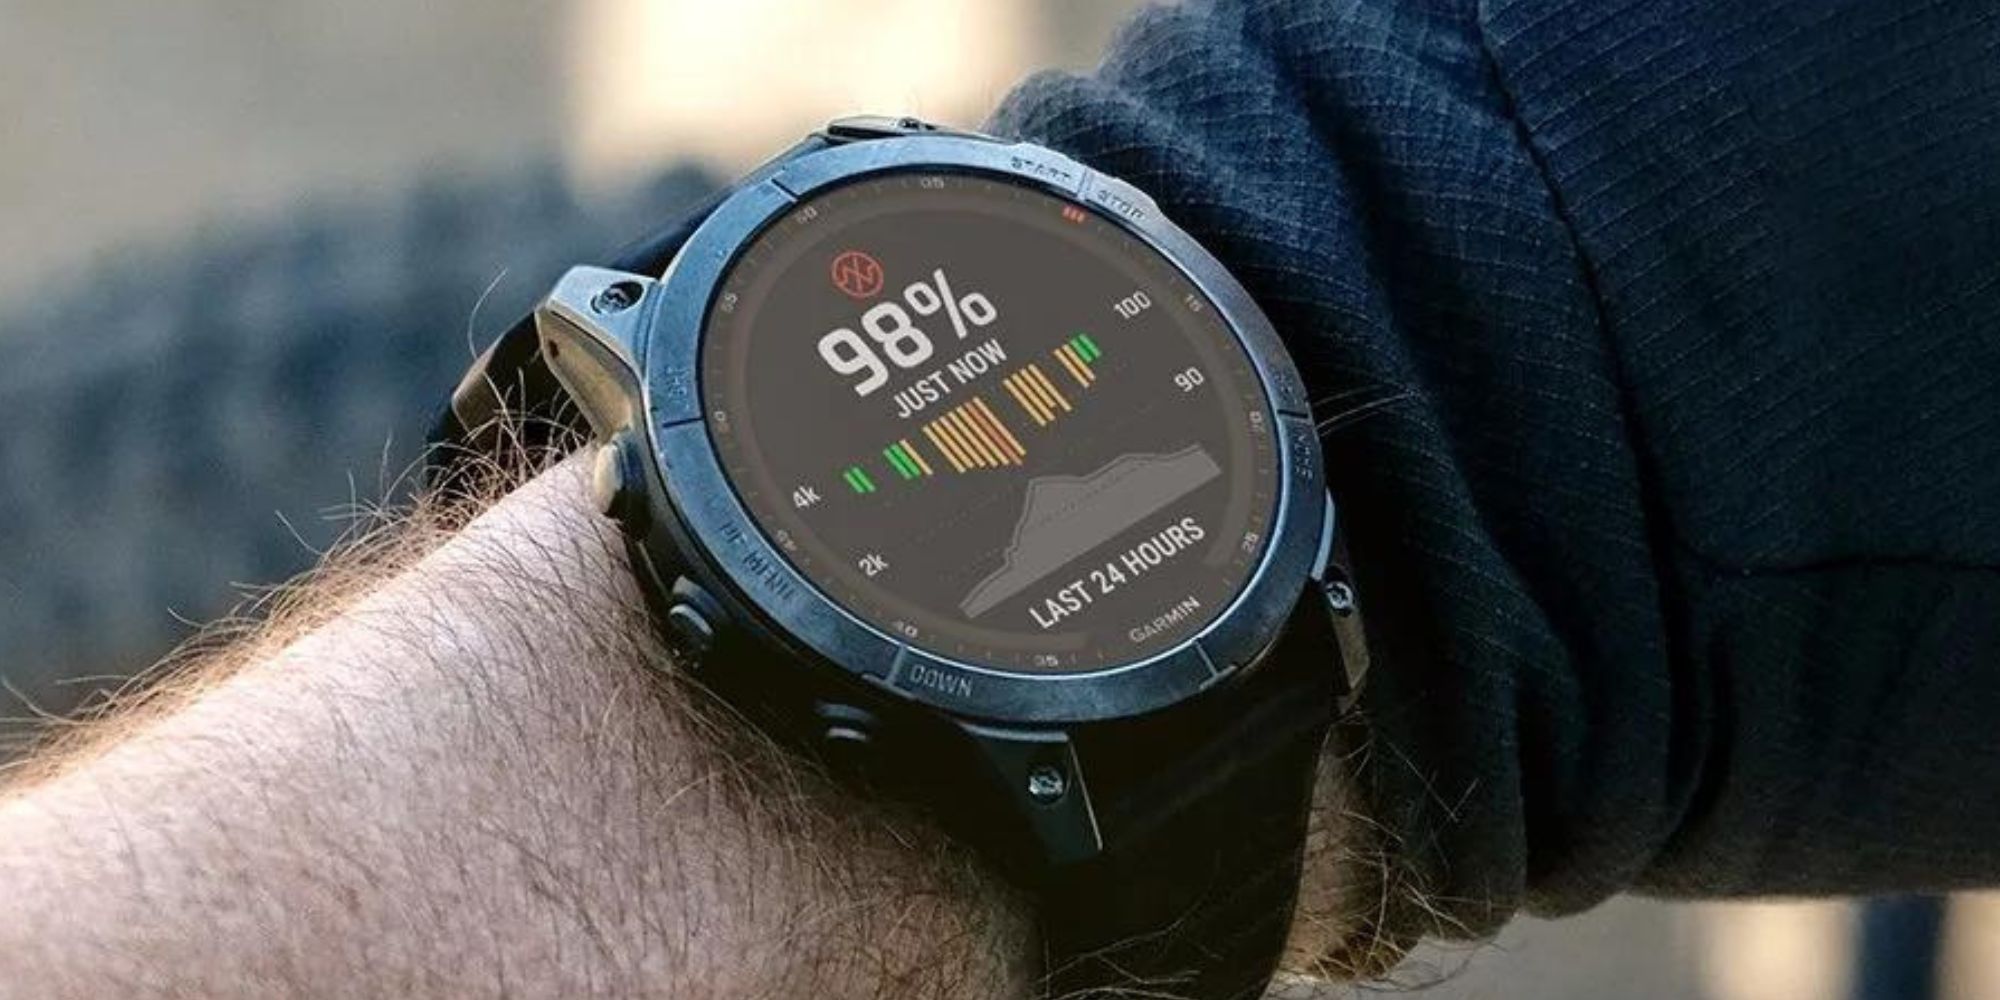 The Garmin Fenix 7 Pro's Best New Features Ranked After 14 Days Of